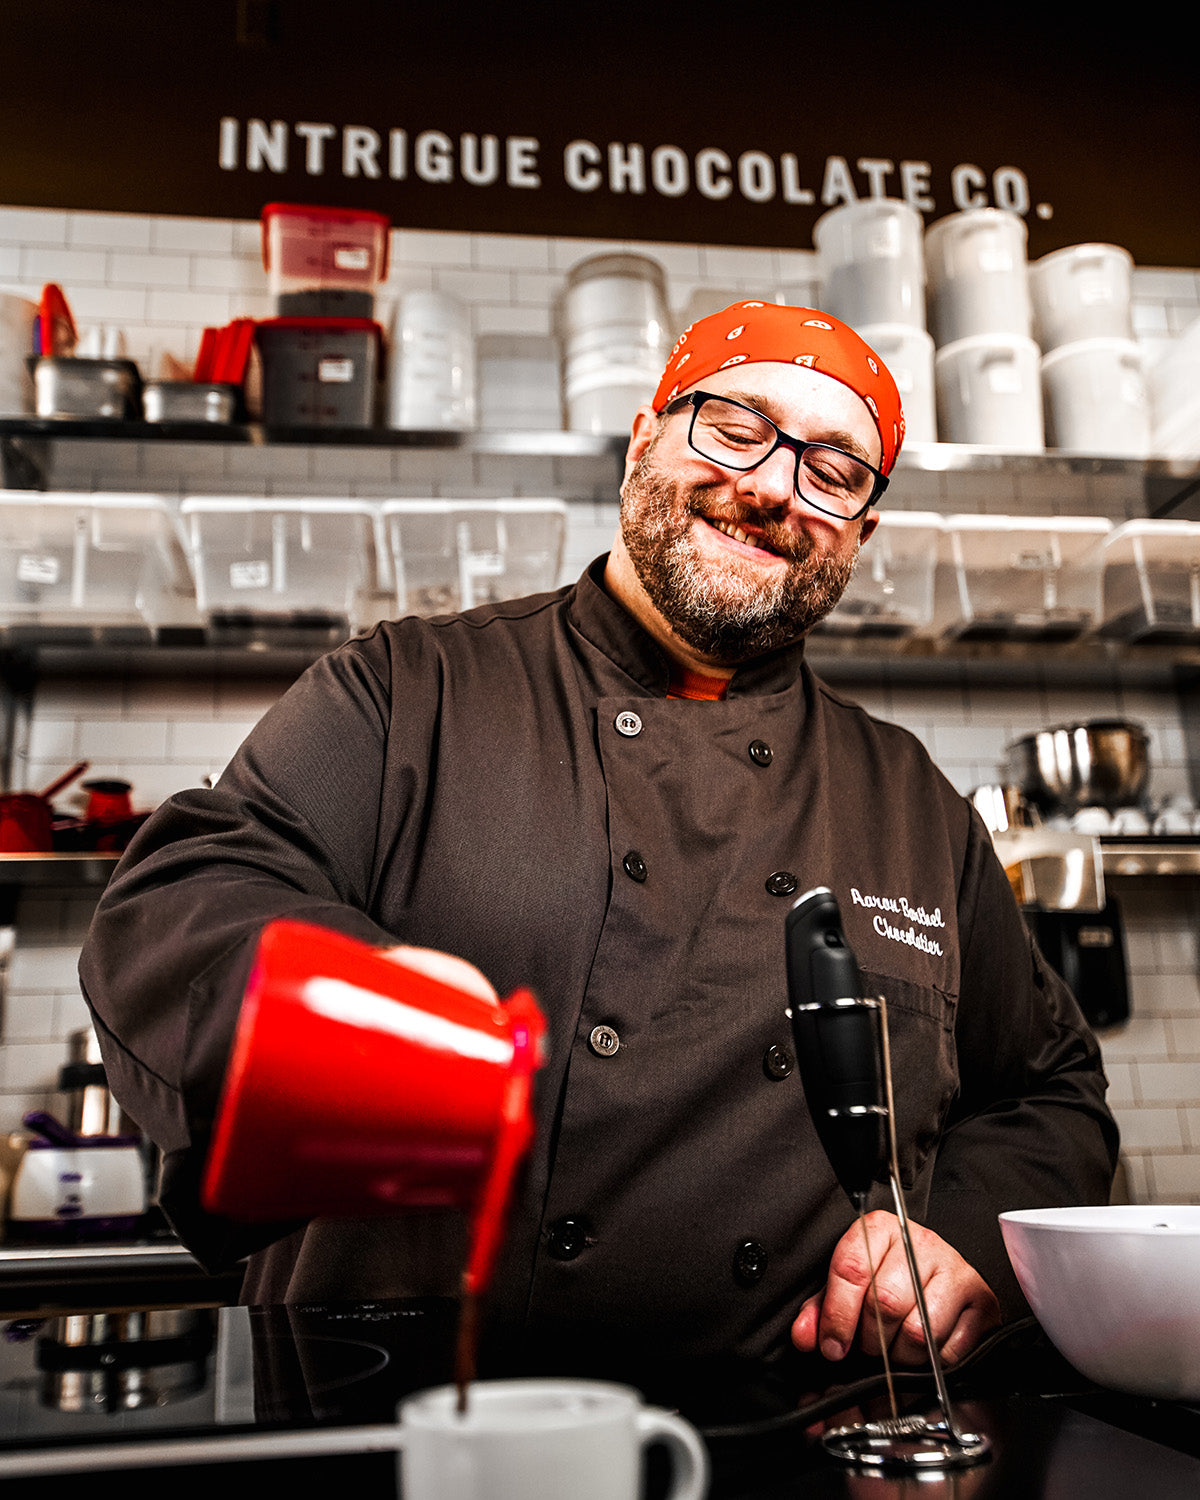 Intrigue Ranks Best Chocolate Shop in WA State, According to Yelp